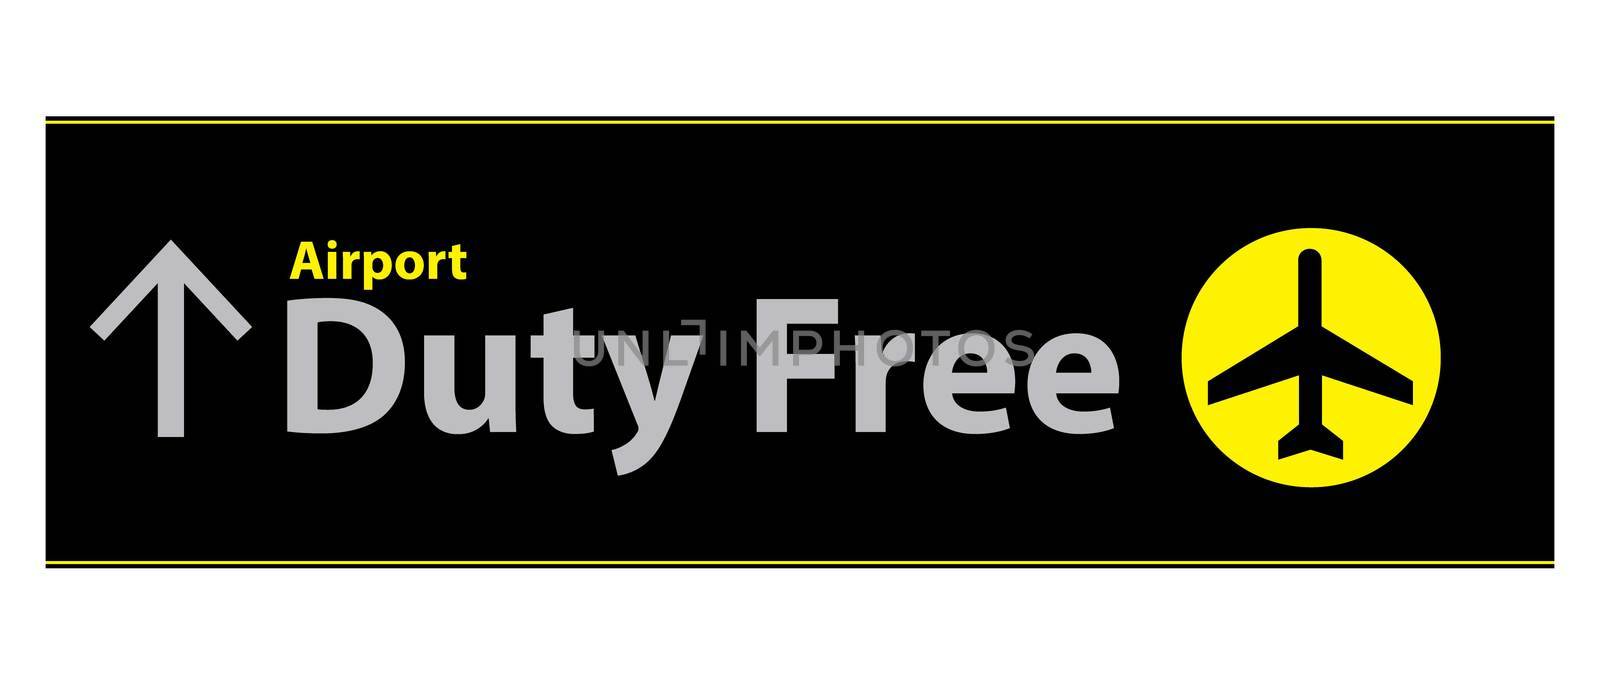 Airport Duty Free Sign in Black and Yellow by DragonEyeMedia